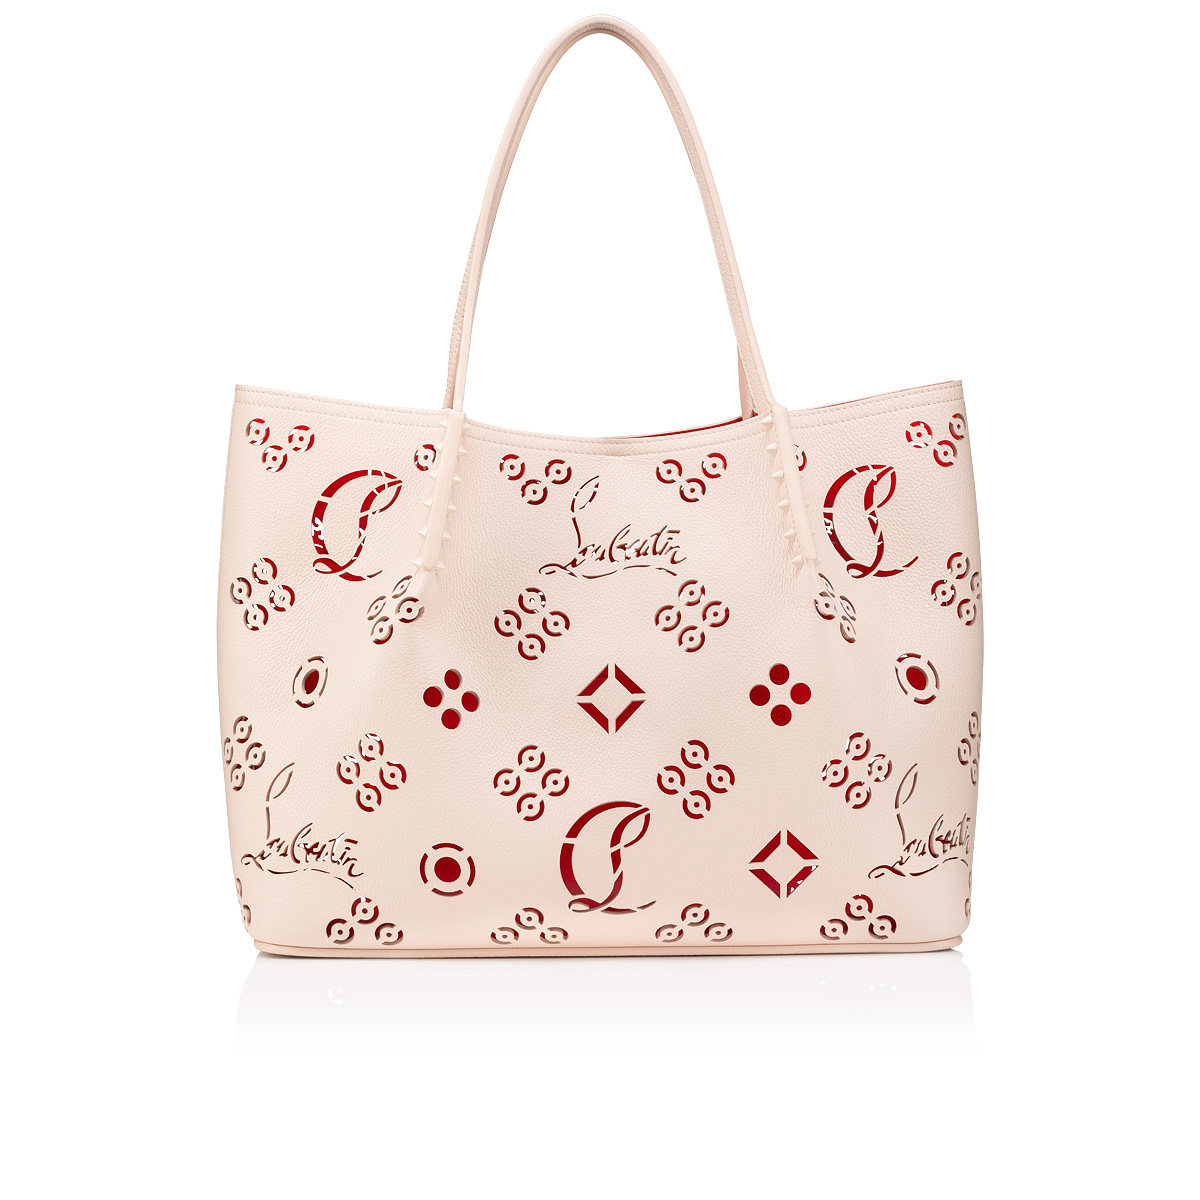 Cabarock large - Tote bag - Perforated calf leather Loubinthesky and spikes  - Leche - Christian Louboutin